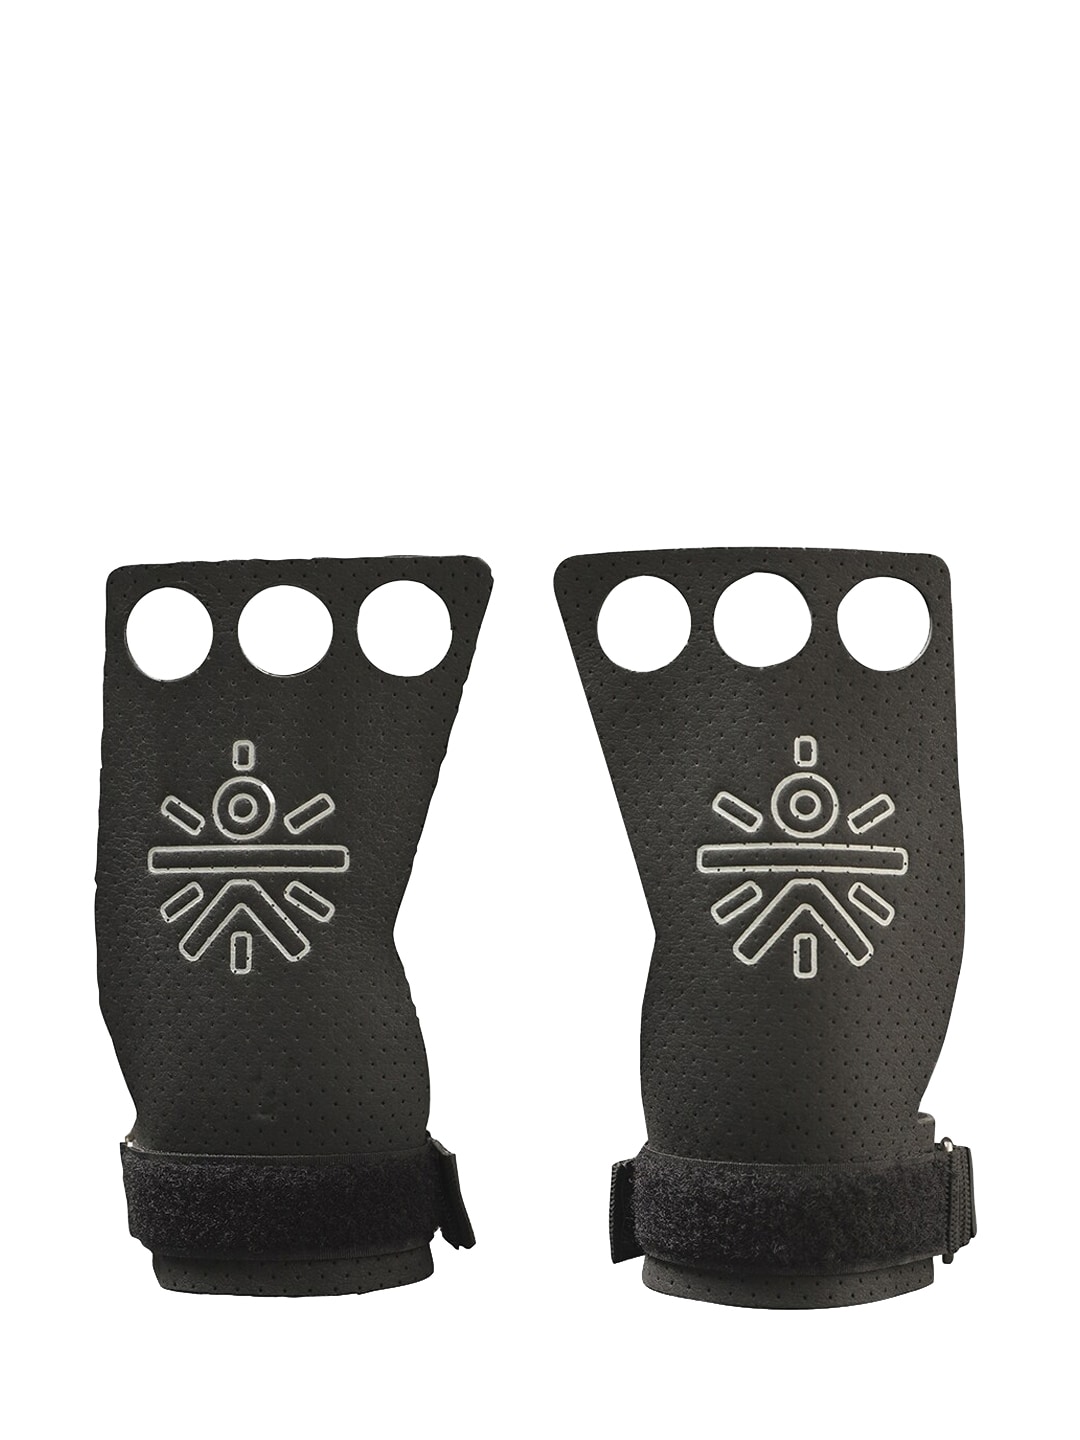 Cultsport Black Printed Gymnastic Gloves Price in India